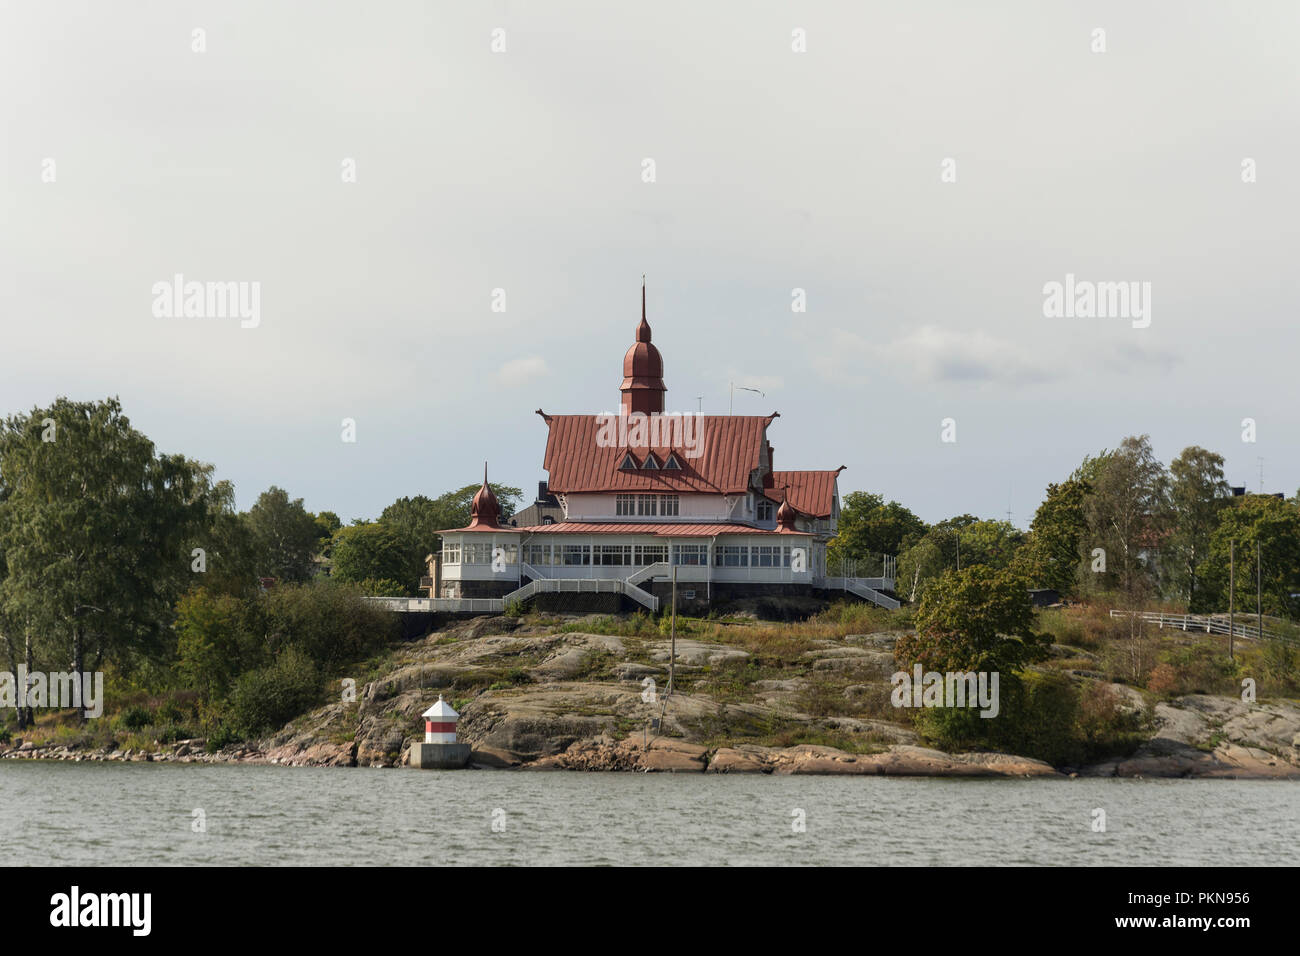 Old wooden house on a islet in Helsinki Finland Stock Photo